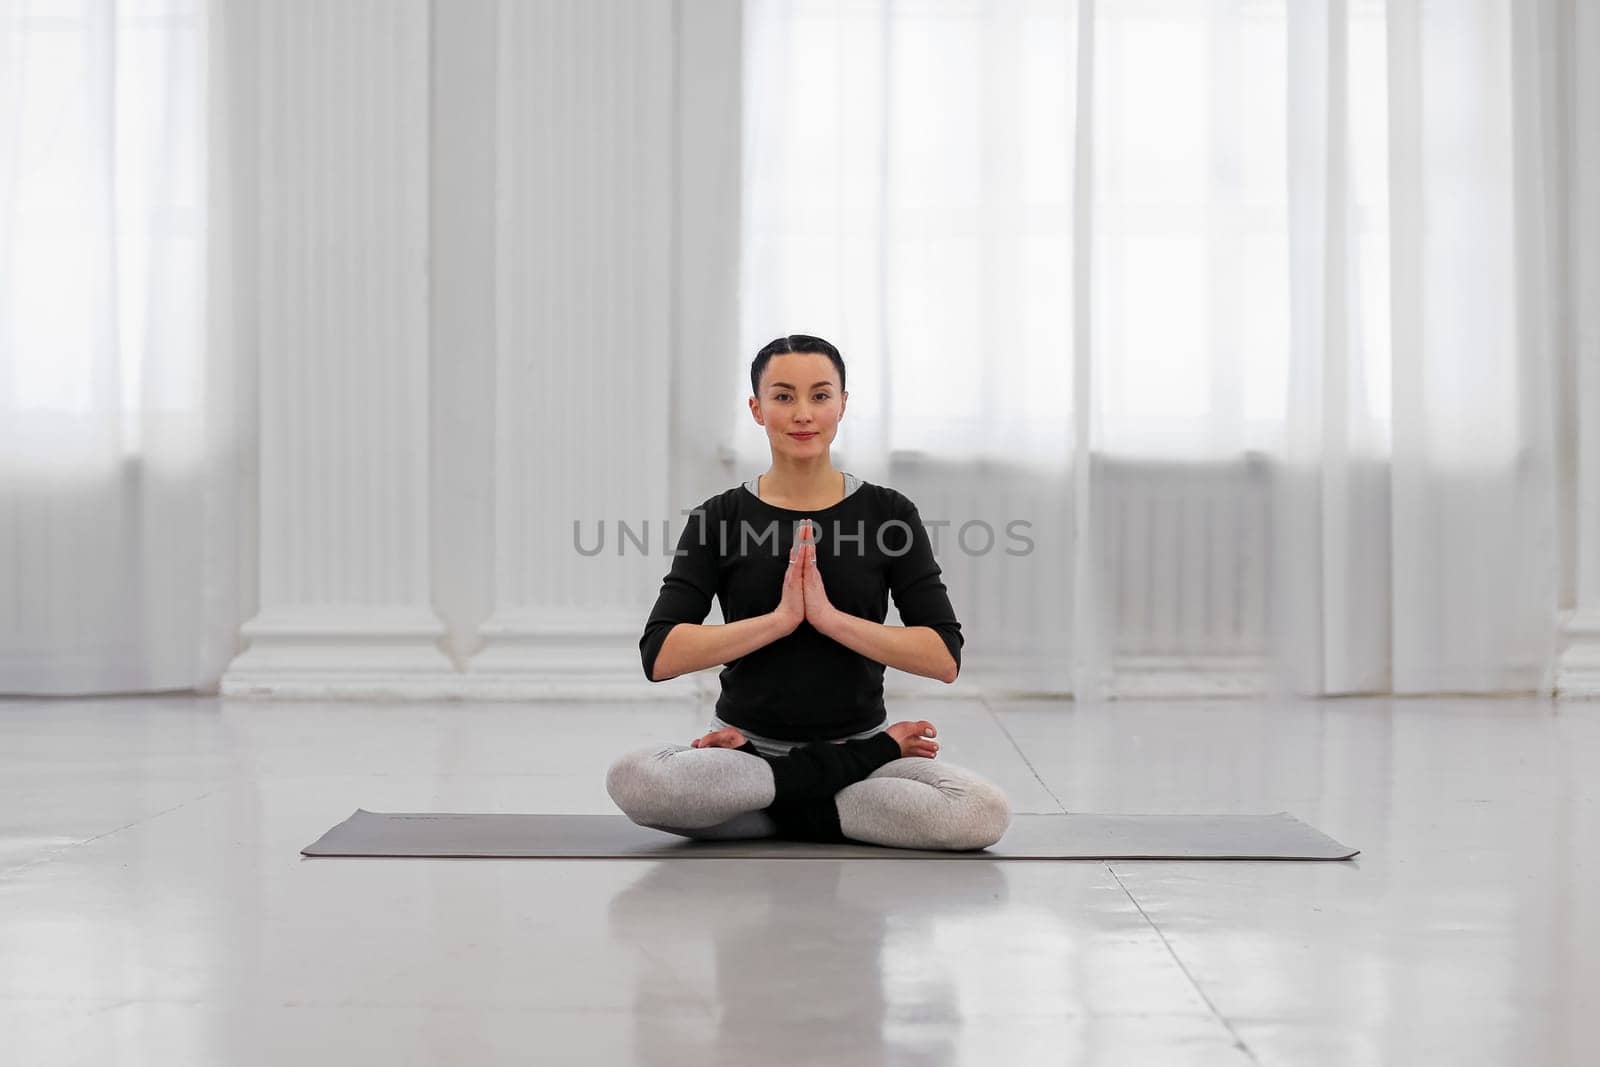 Healthy young woman doing padmasana lotus pose during yoga classes in a cozy bright room. The concept symbolizes purity and perfection with Buddhist meditation.